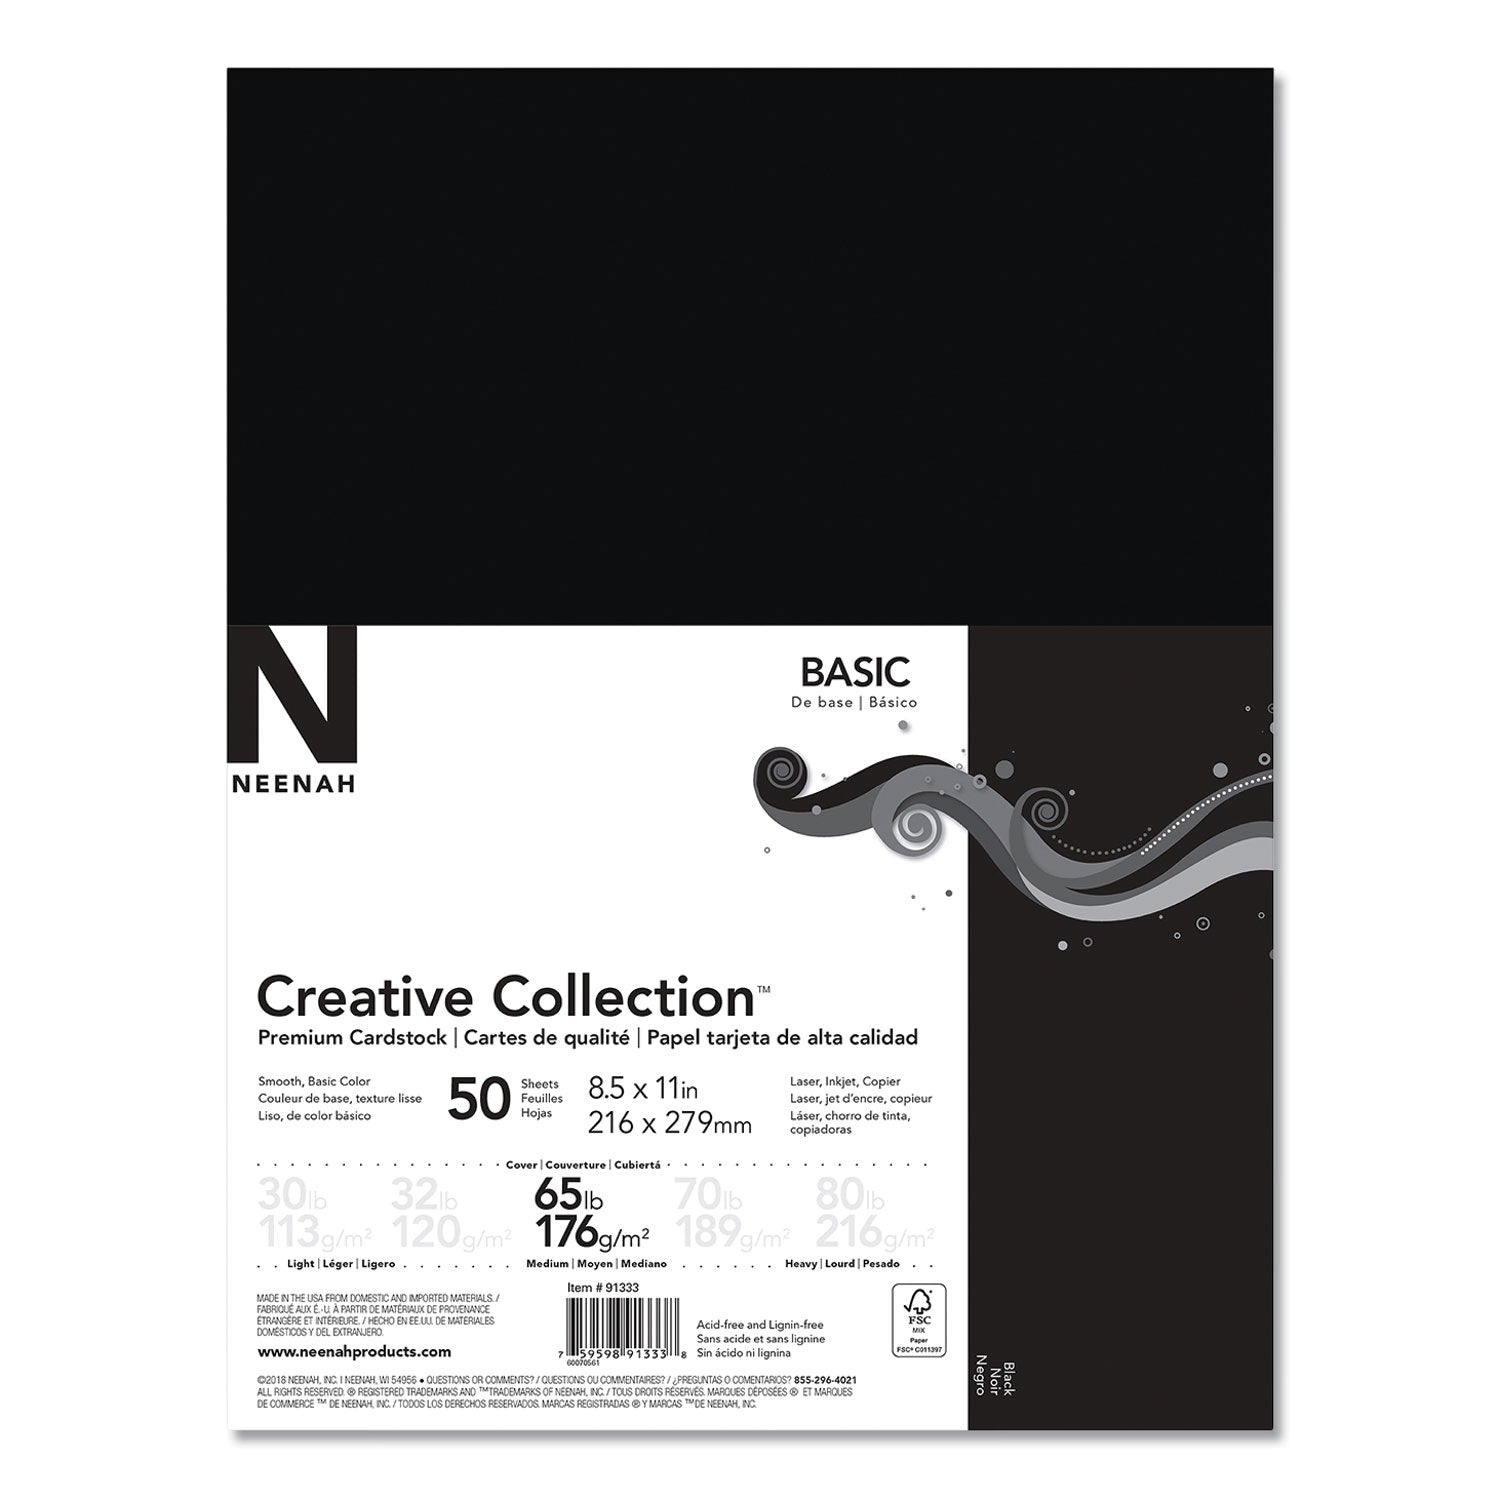 creative-collection-premium-cardstock-65-lb-cover-weight-85-x-11-black-50-pack_nee91333 - 1